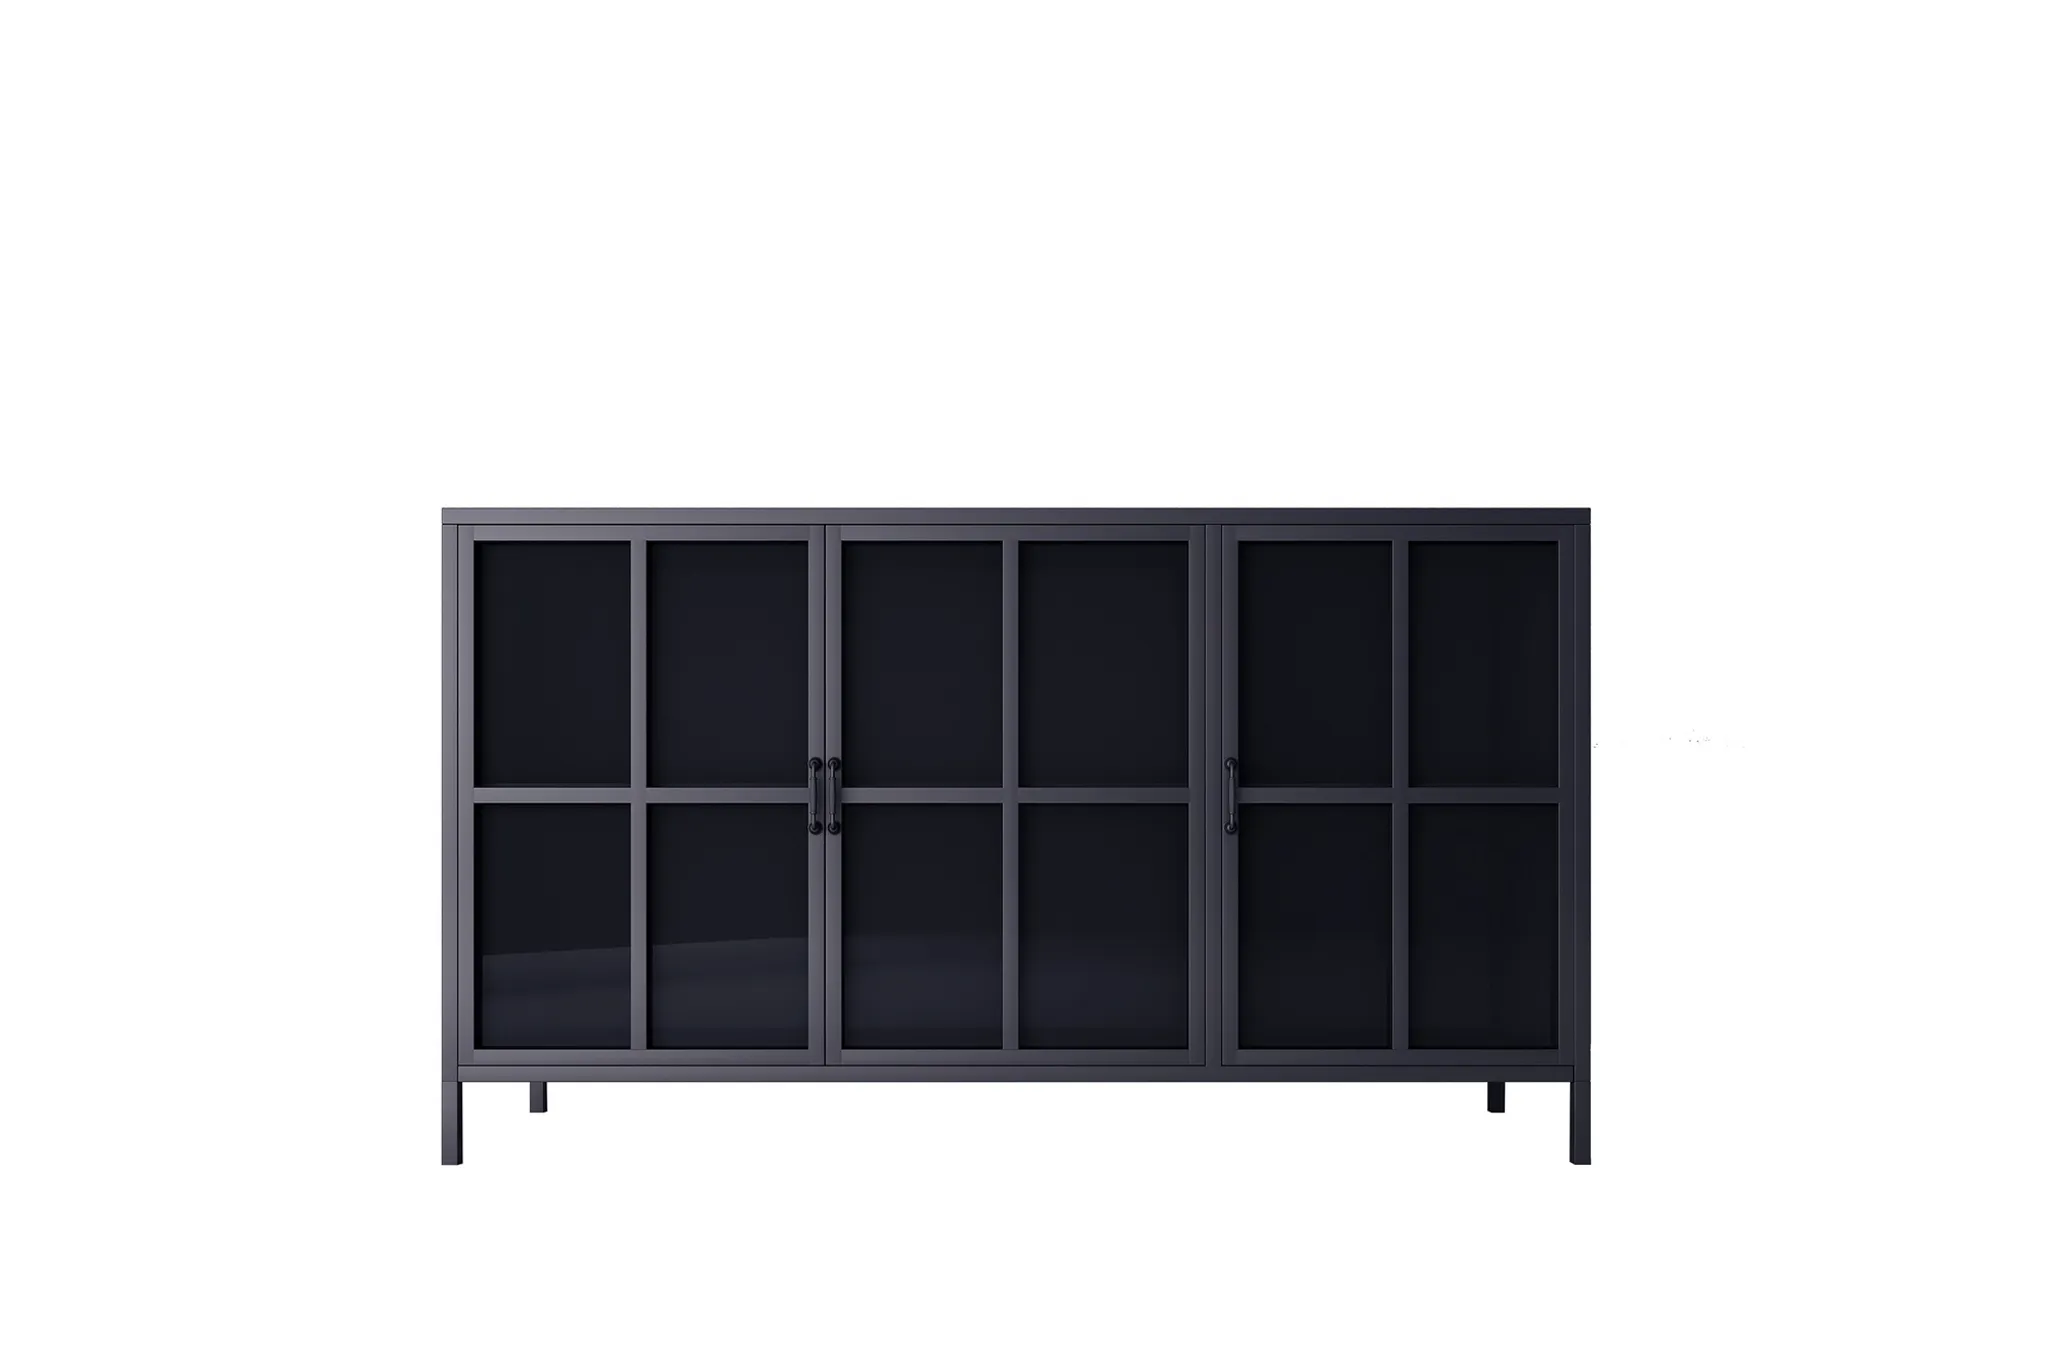 HOMEXPERTS CHOICE, Kommode Sideboard mit